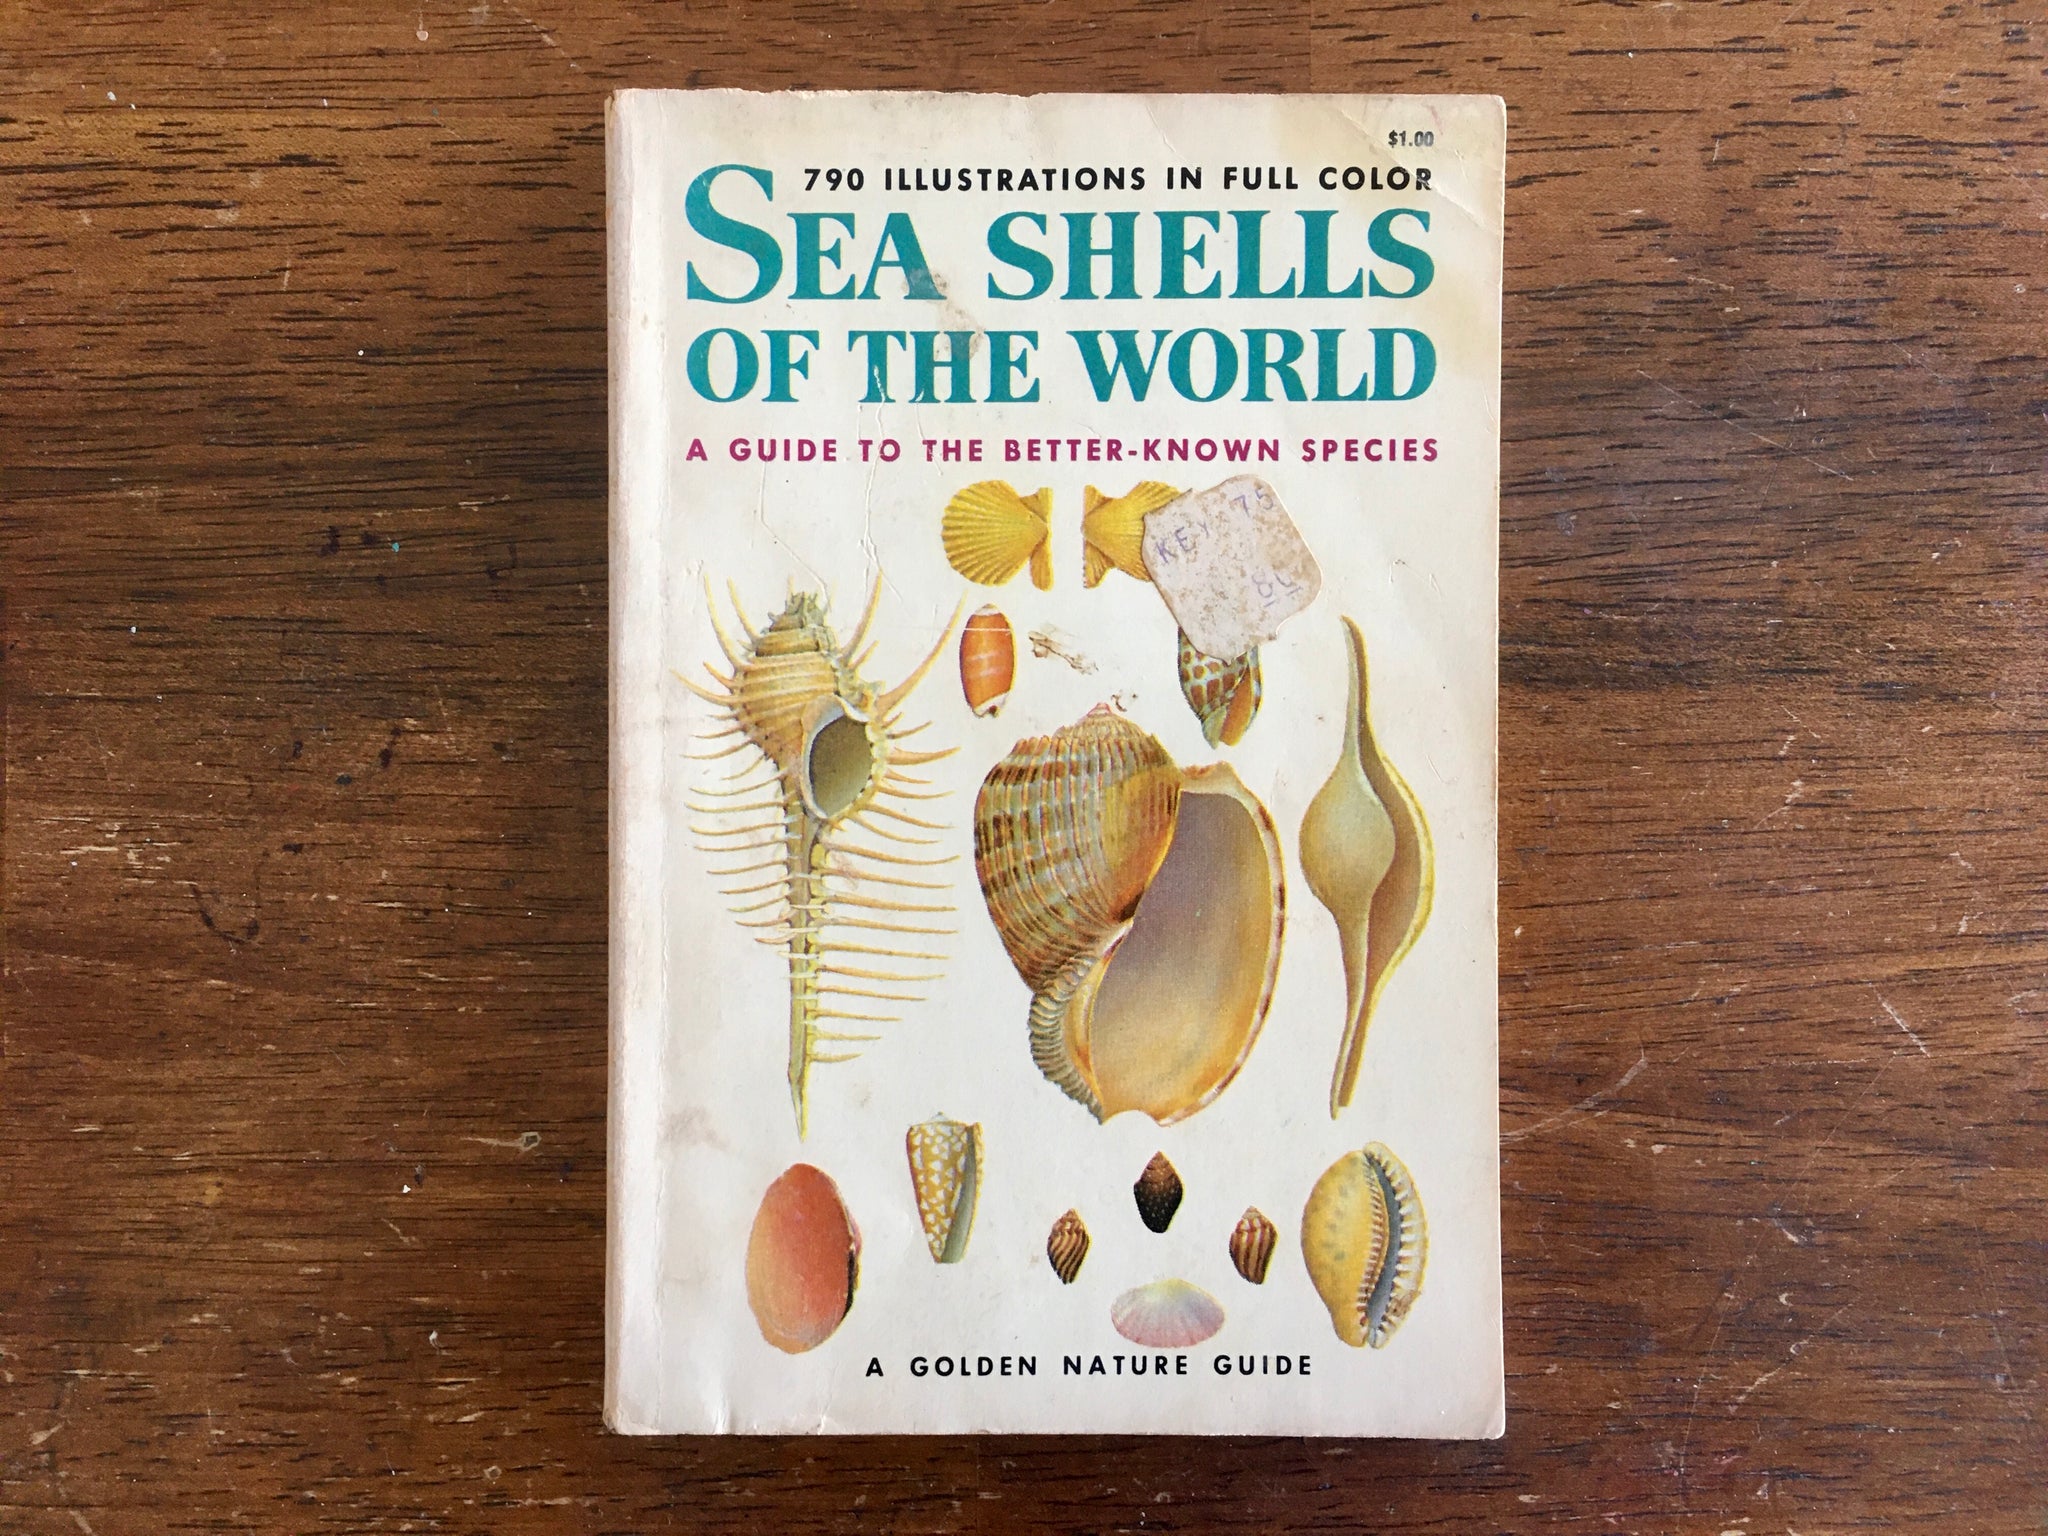 The Mystery of Shells - Childhood By Nature